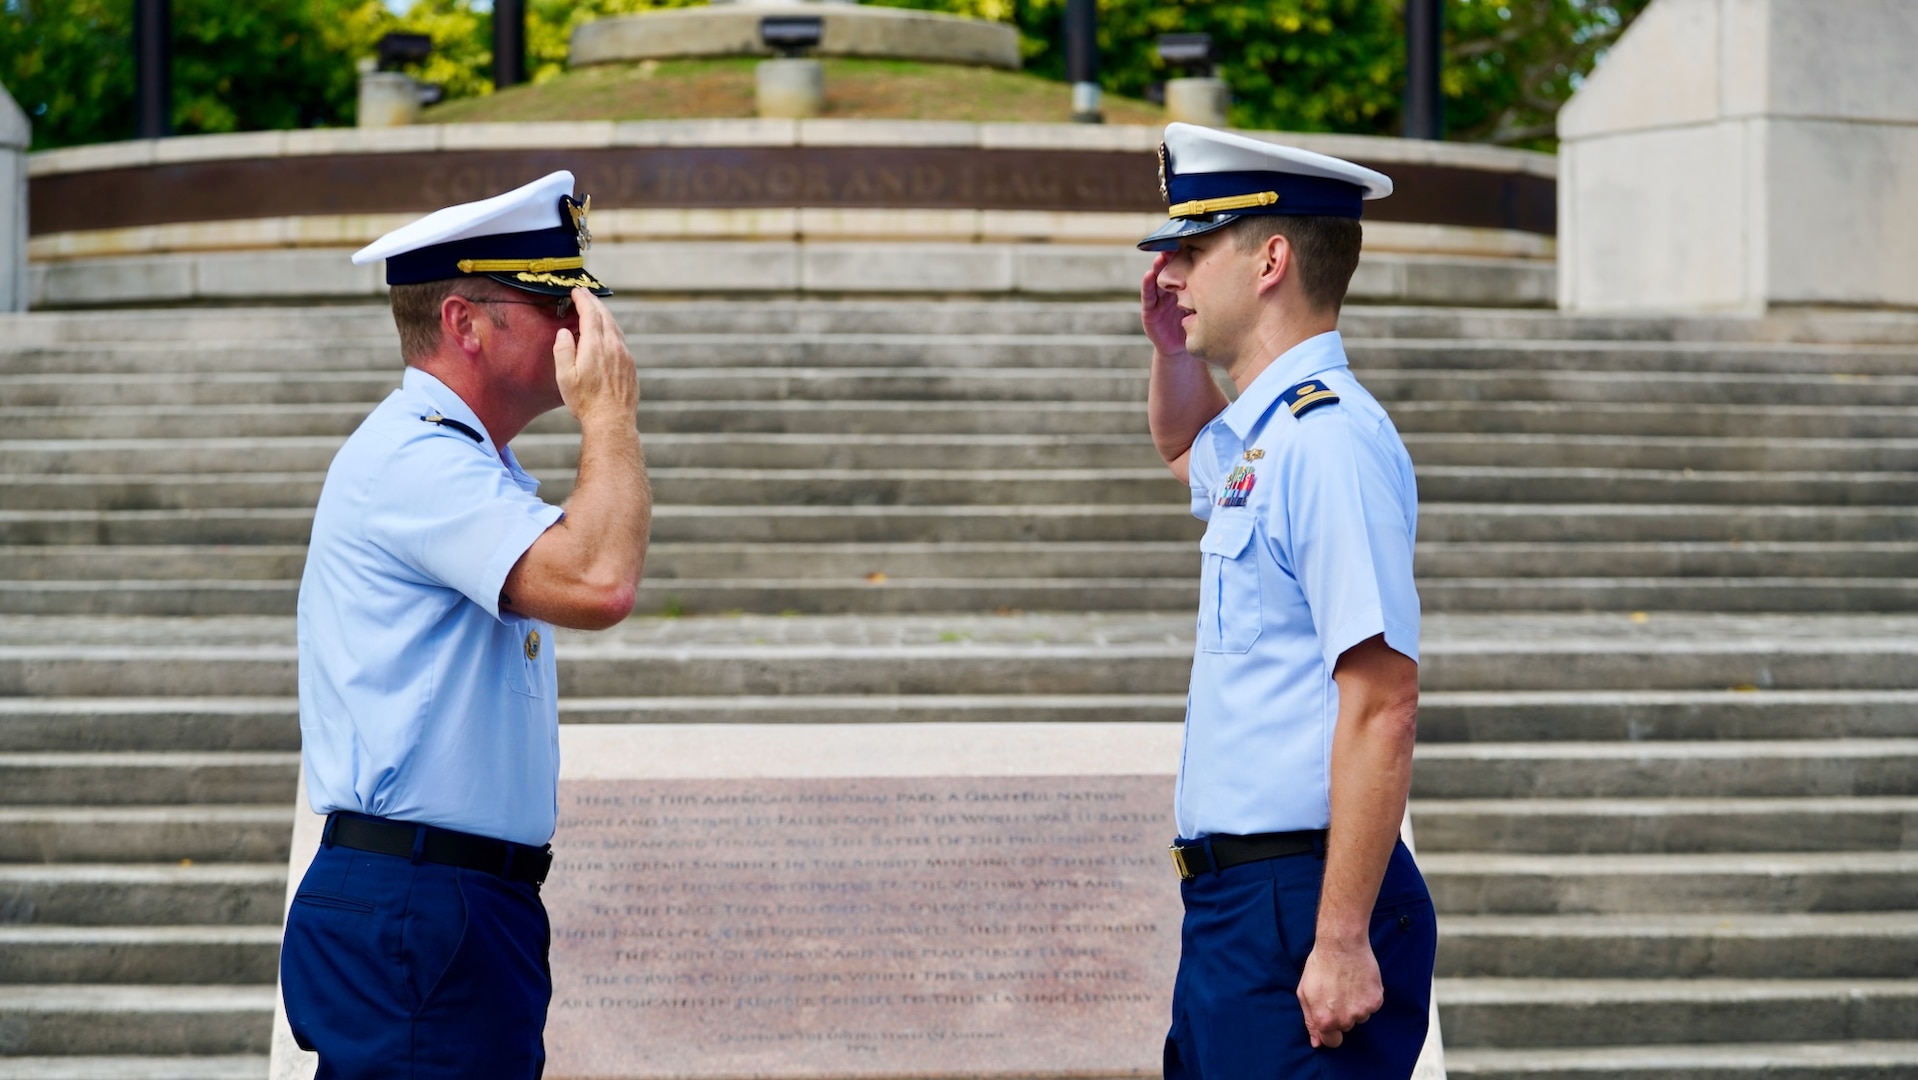 Lt. Justin Miller, commanding officer of Marine Safety Unit Saipan, salutes Capt. Nicholas Simmons, commander of U.S. Coast Guard Forces Micronesia/Sector Guam, at a ceremony to formally establish MSU Saipan in Garapan at the American Memorial Park on April 5, 2024. This significant achievement marks a milestone in leadership evolution and responsibility expansion within the U.S. Coast Guard, reflecting steadfast commitment to serving the people of Saipan and the Commonwealth of the Northern Marianas Islands (CNMI) with unparalleled dedication and excellence. The change is part of an initiative to provide junior officers with increased command opportunities, fostering professional growth and leadership development within the ranks. Eighteen marine safety detachments are converting to marine safety units. (U.S. Coast Guard photo by Chief Warrant Officer Sara Muir)